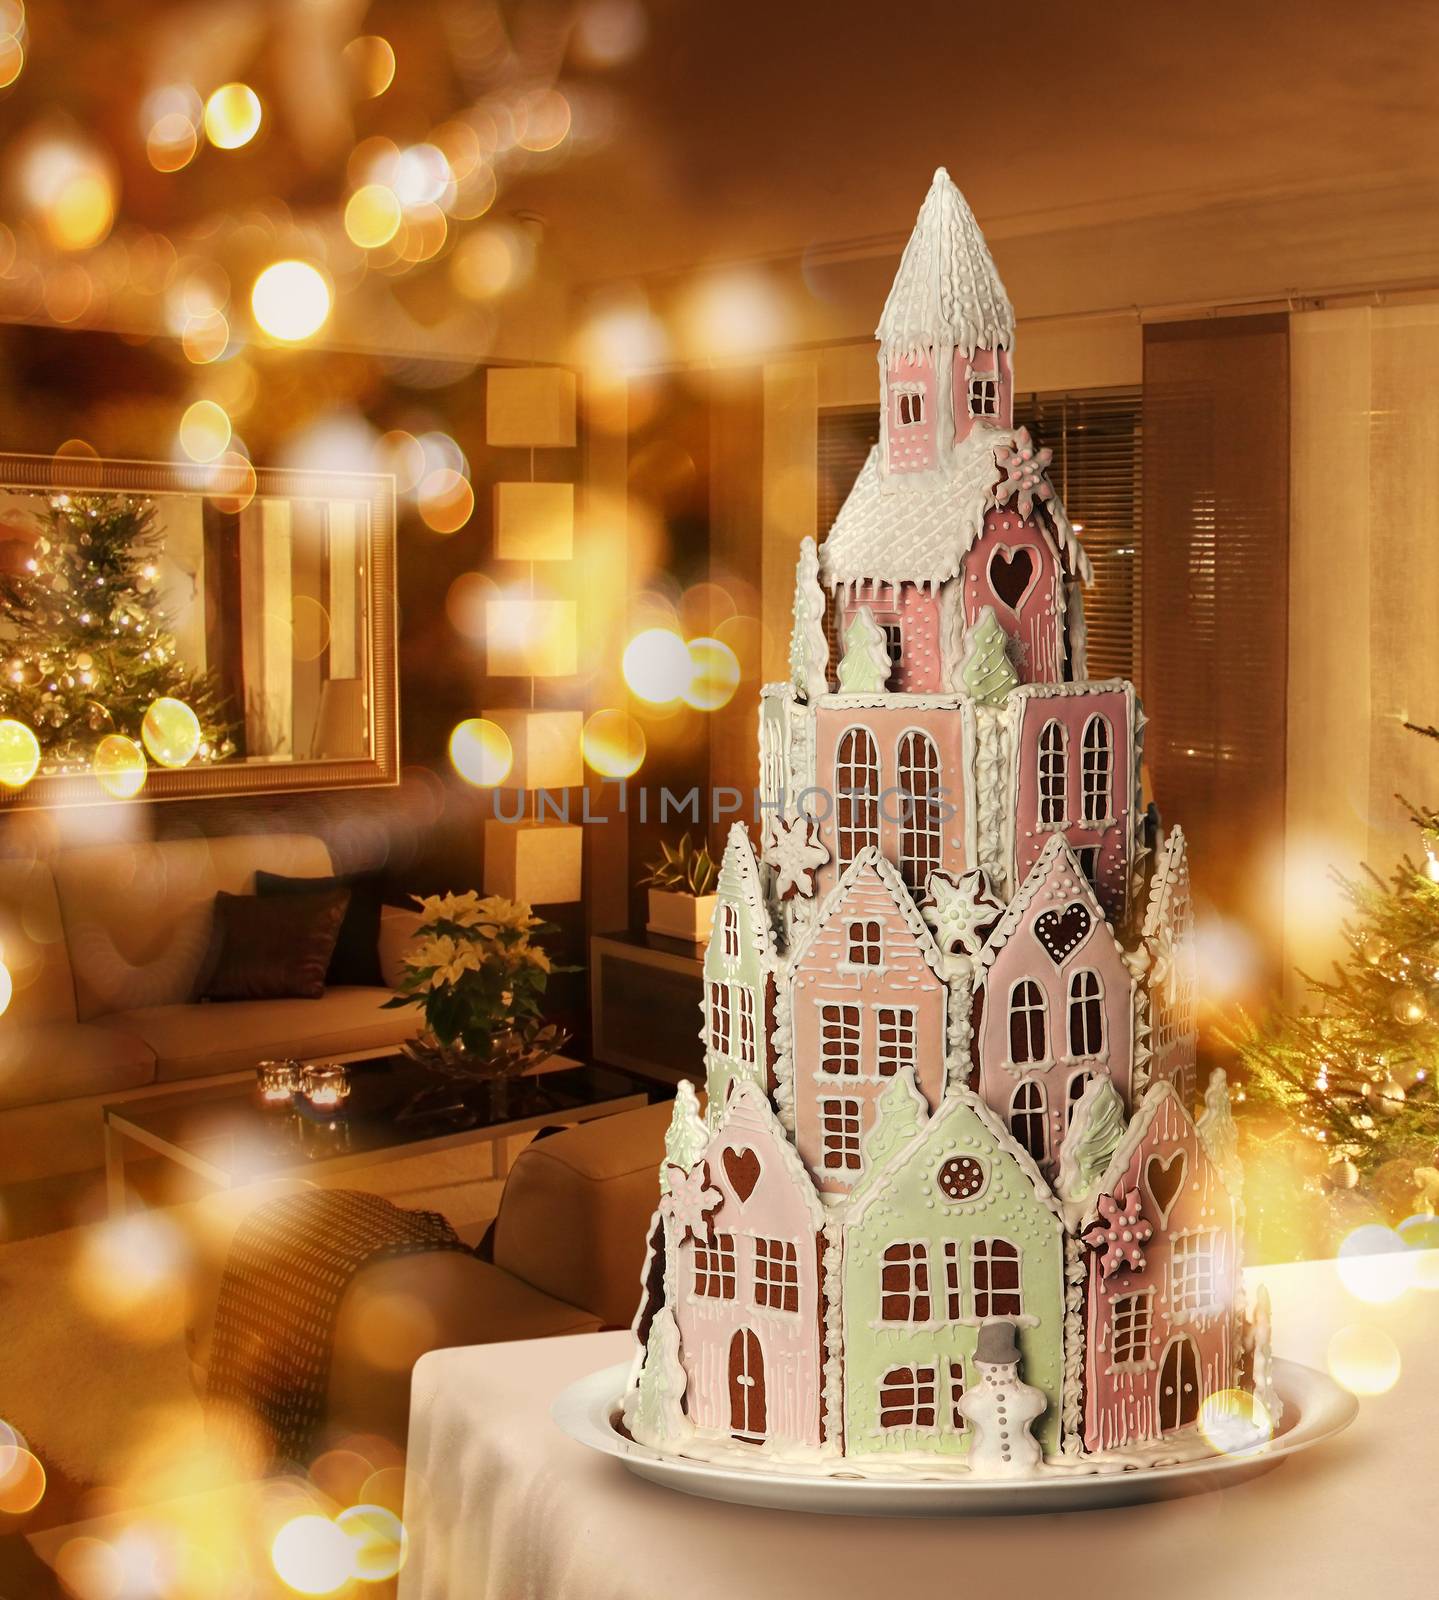 Gingerbread cookies castle decoration in Christmas tree room by anterovium